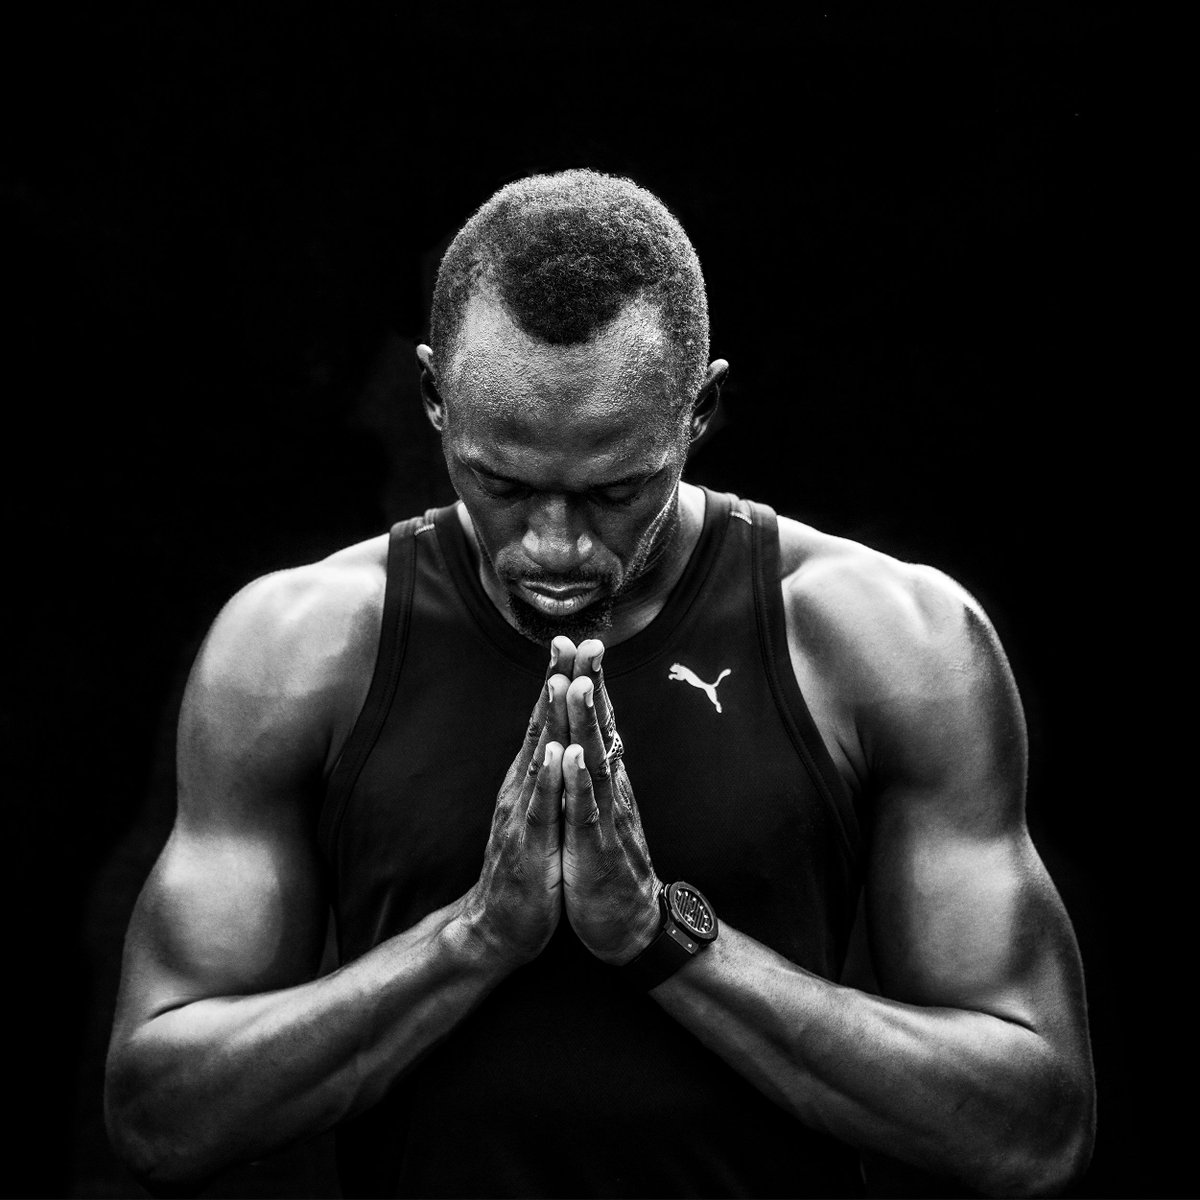 The only thing you can do in less than 10 seconds is RT this. @usainbolt is #ForeverFastest.